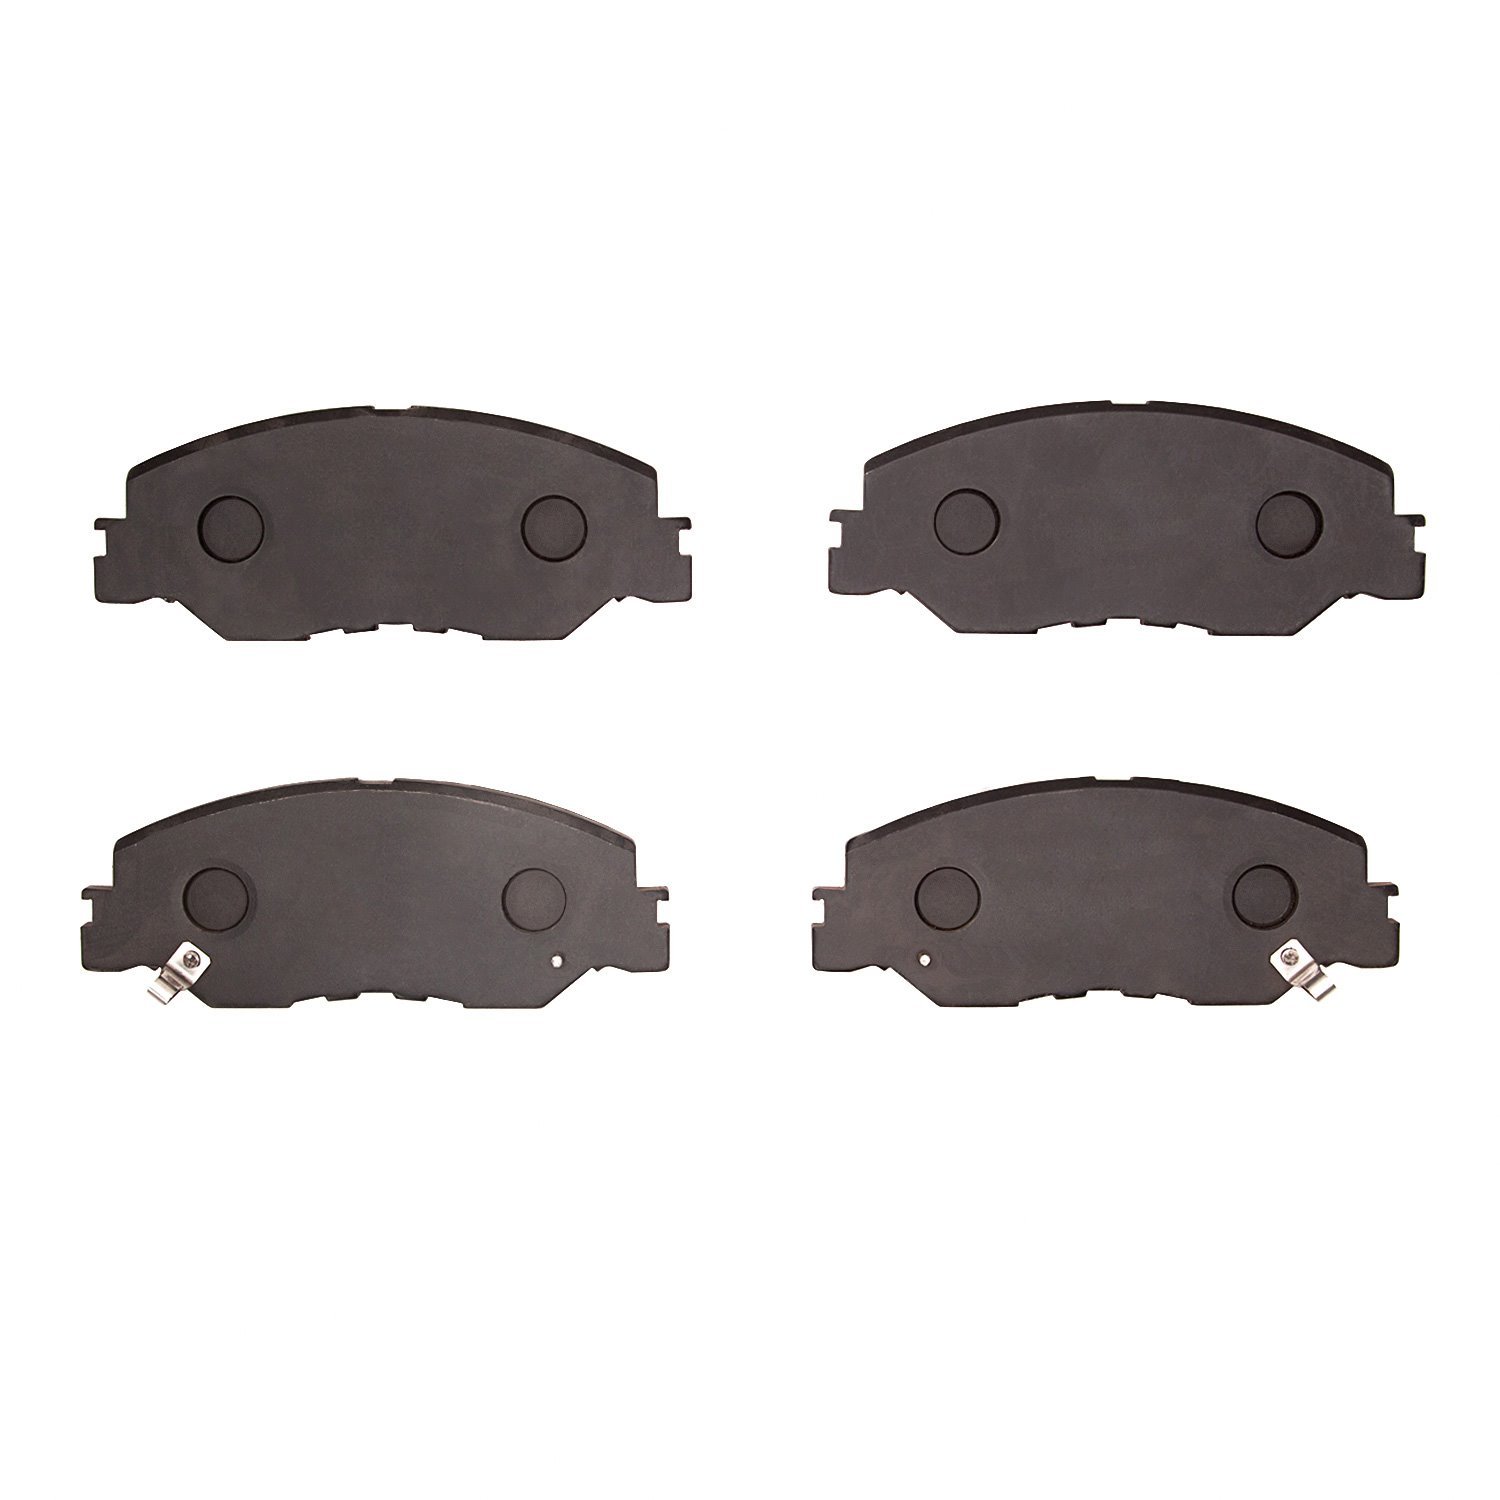 1310-2185-00 3000-Series Ceramic Brake Pads, Fits Select Acura/Honda, Position: Front